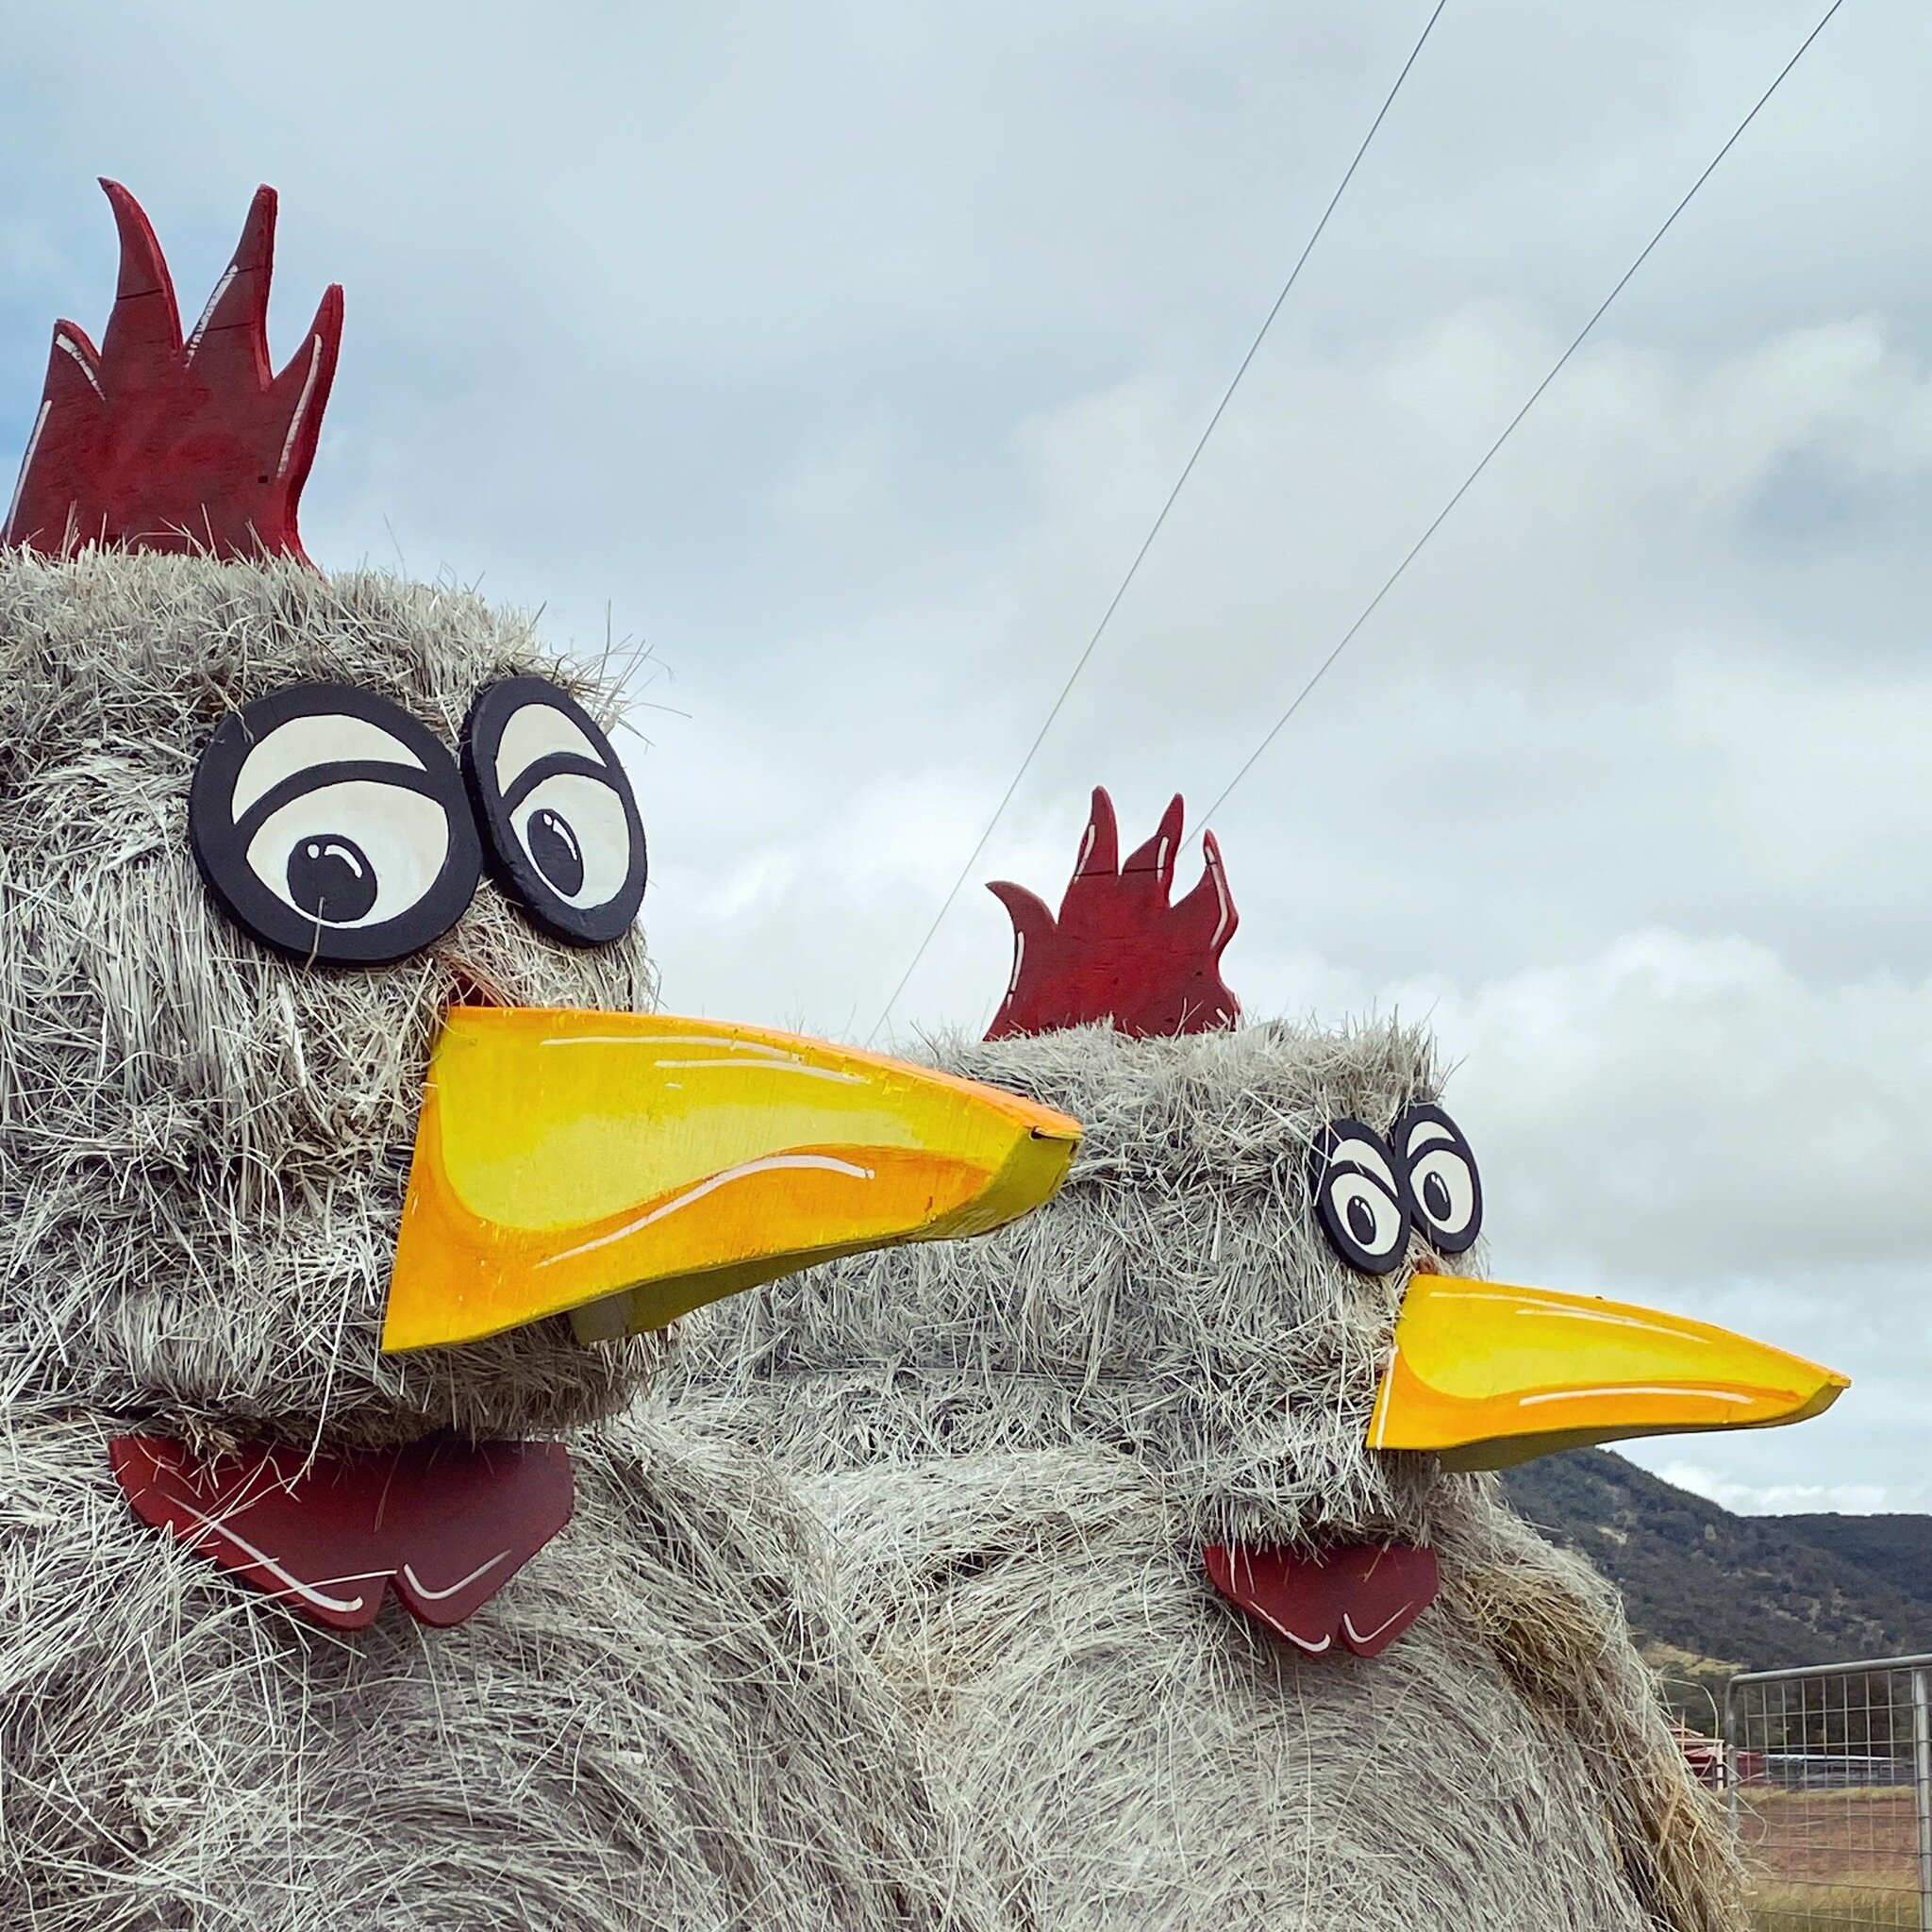 Come and chick out Peakvue! You&rsquo;ll find something to beak your interest. The chickens are again finding themselves in peck-uliar circumstances. We&rsquo;ve been working around the cluck to get these finished for the @tenterfieldautumnfestival h